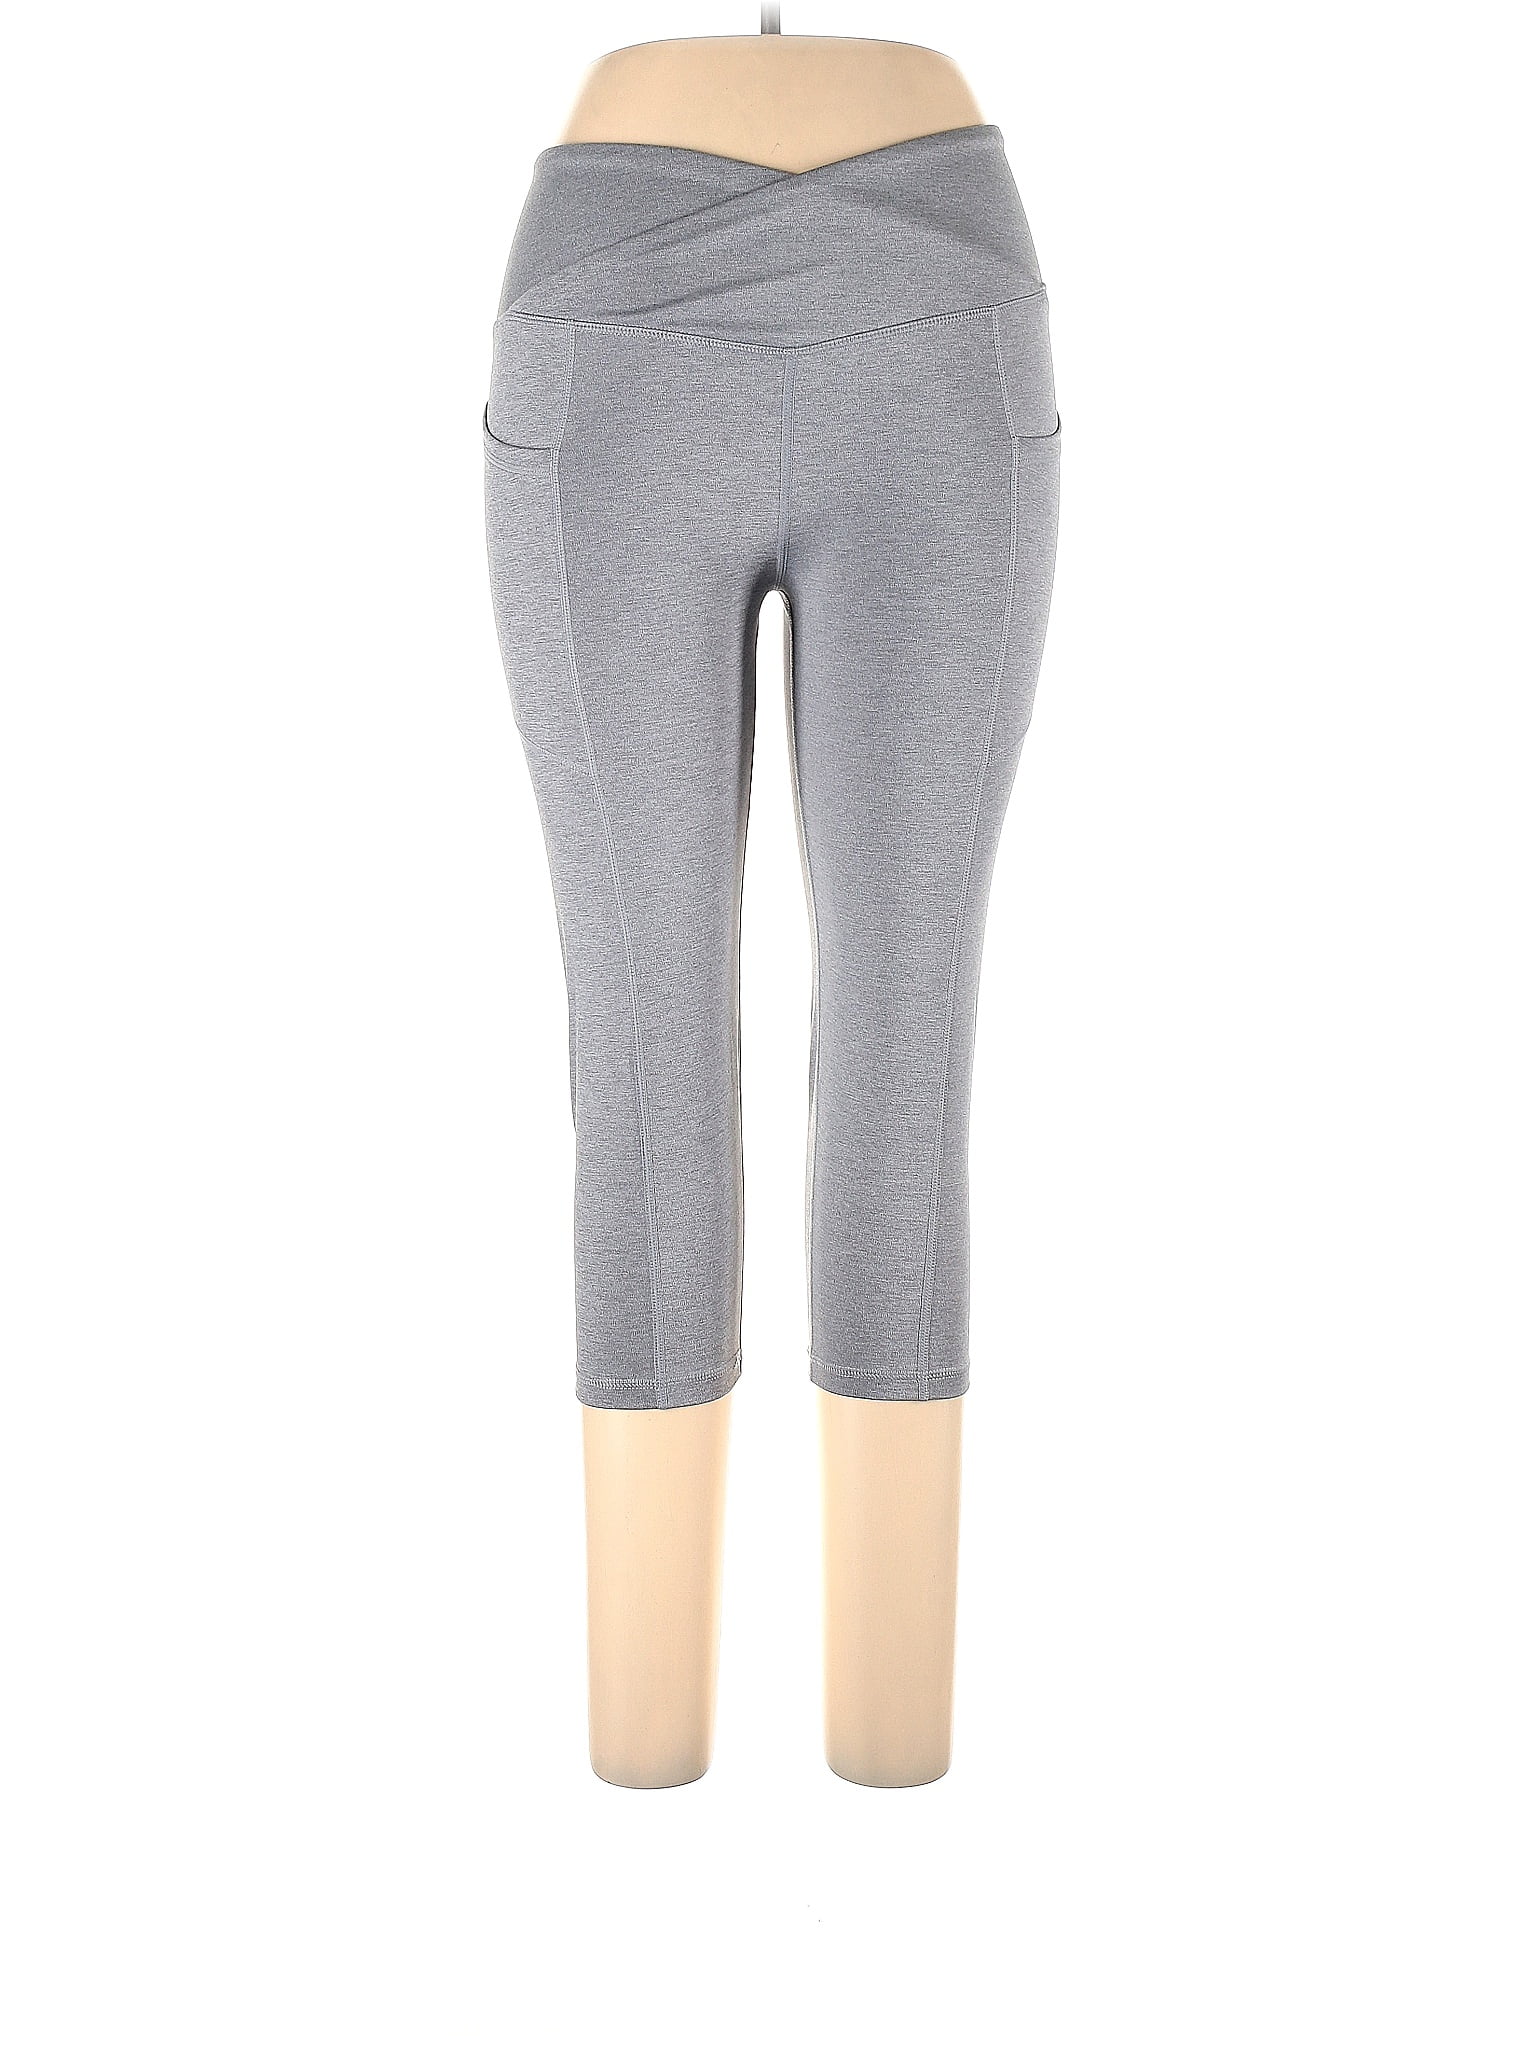 Earth Yoga Marled Gray Active Pants Size L - 60% off